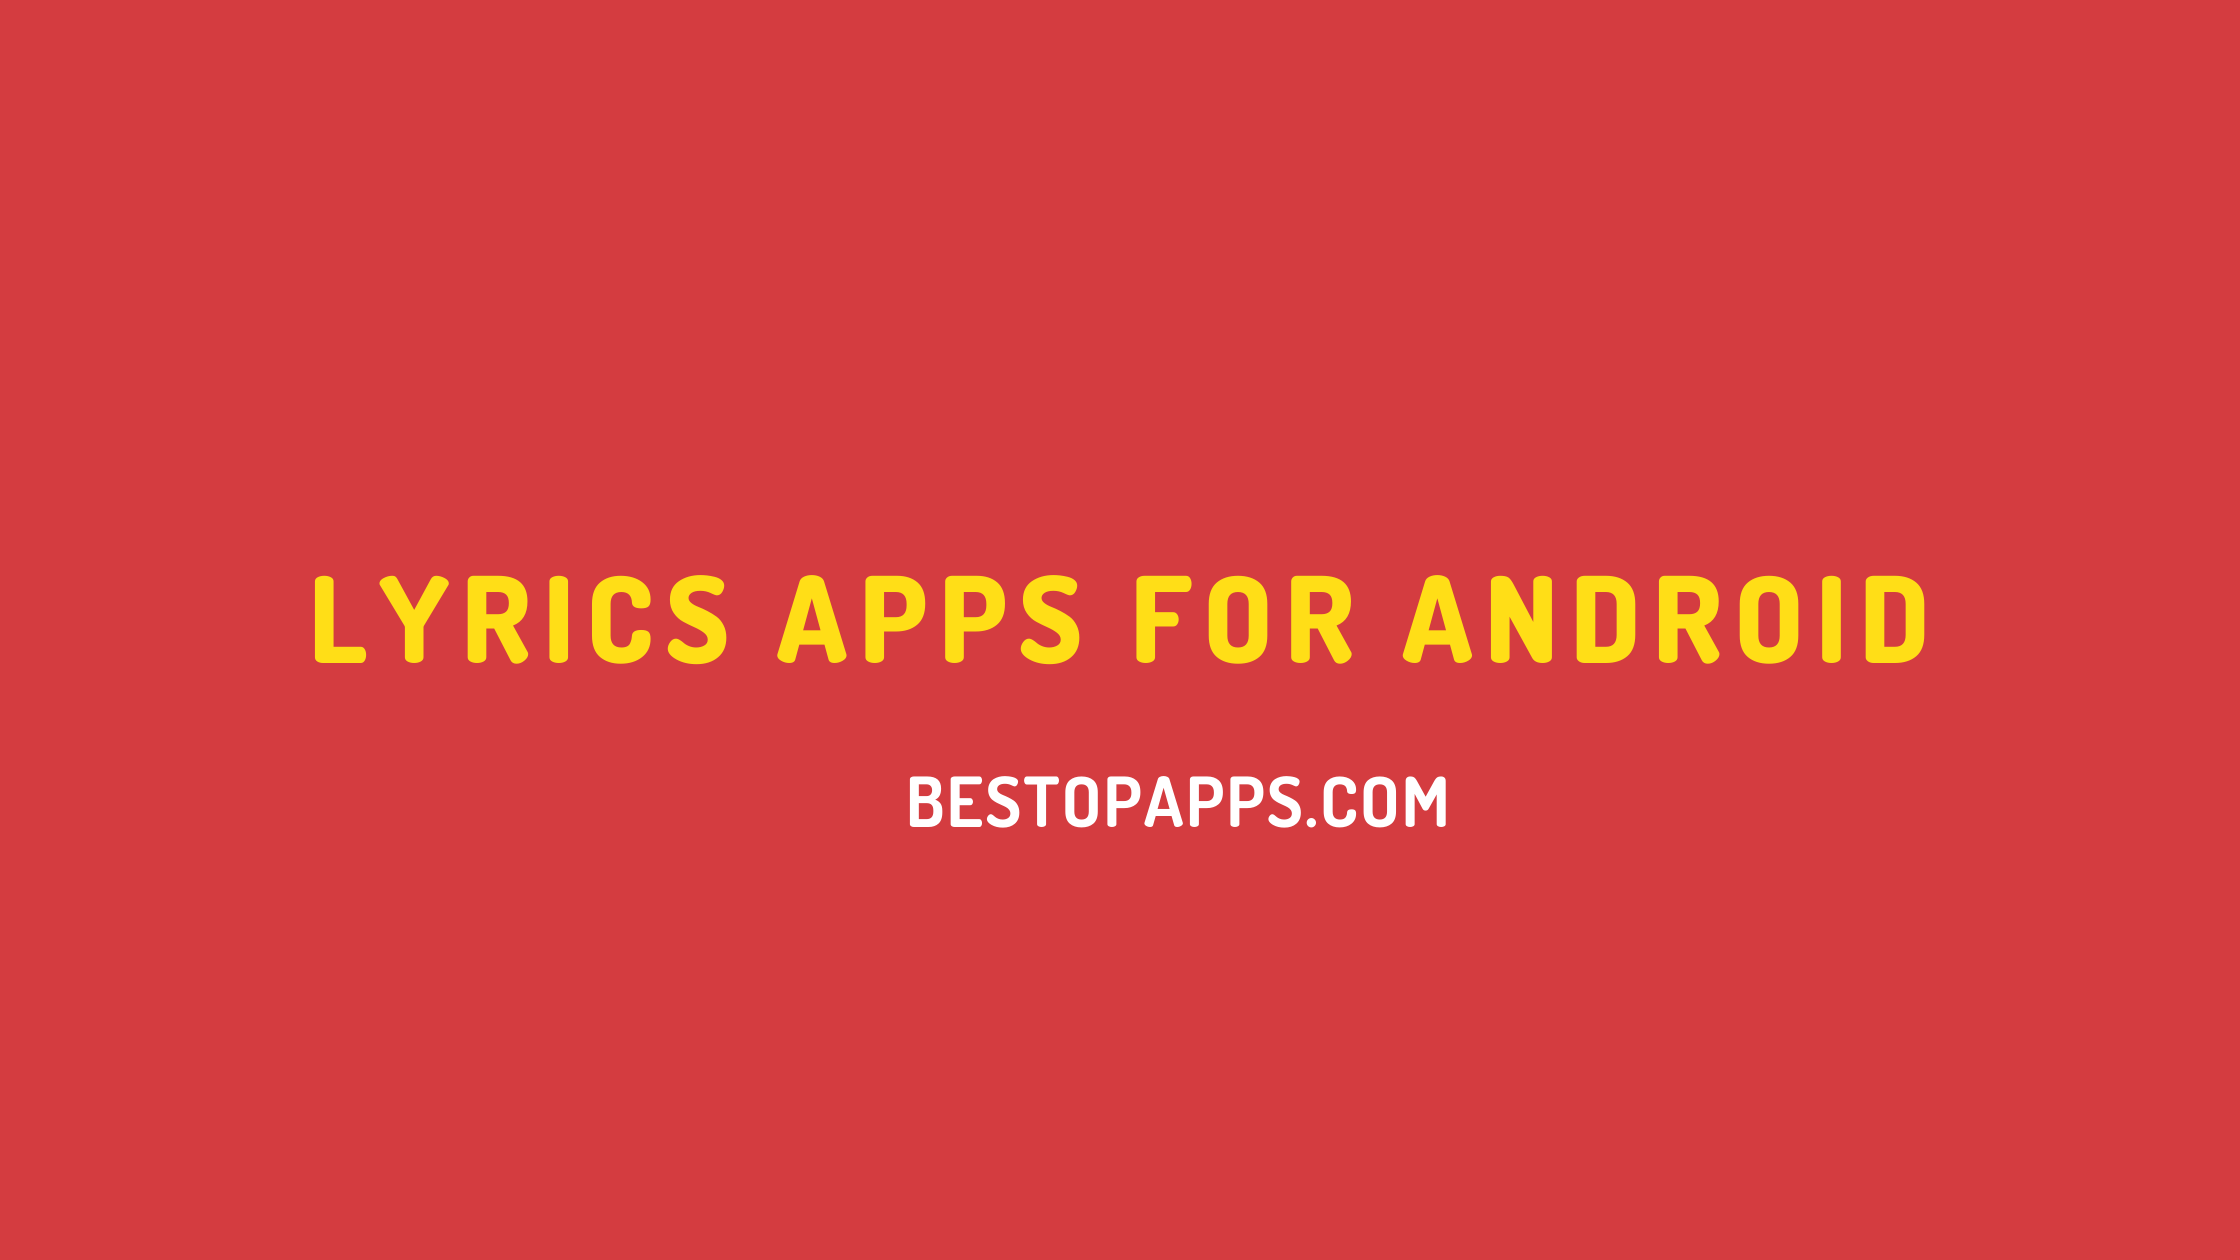 Lyrics Apps for Android